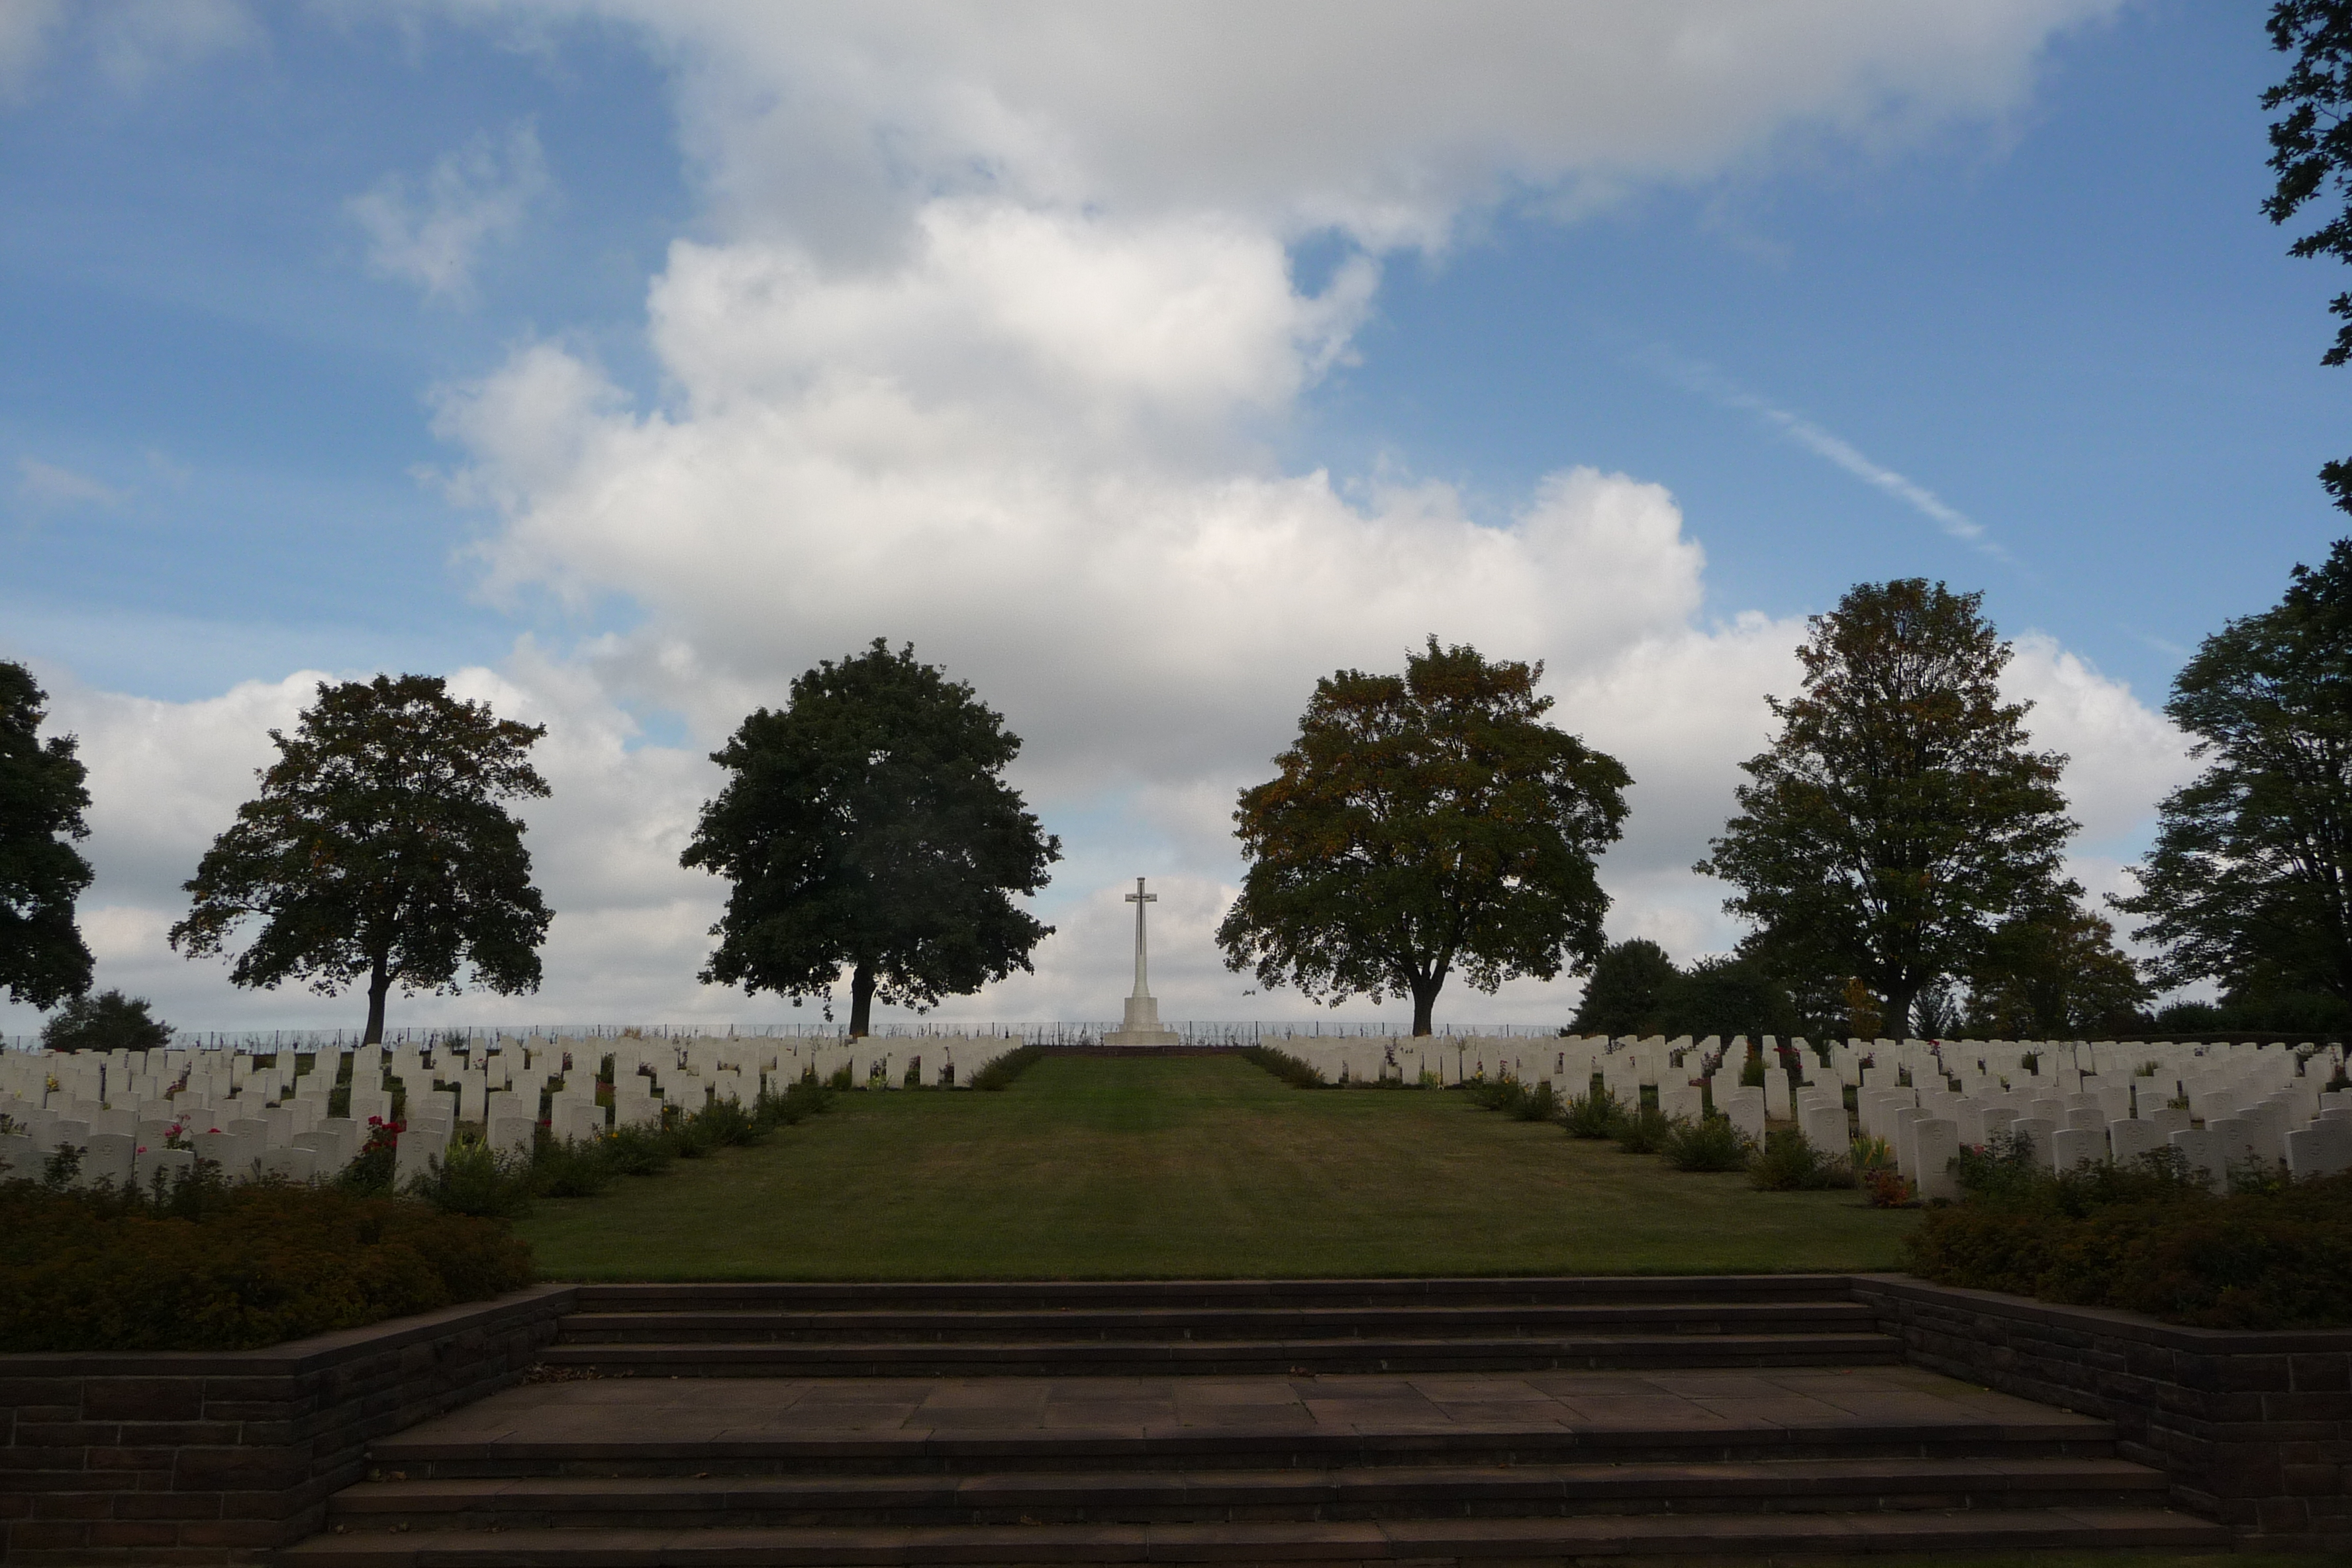 English war cemetery in Hanover-Ahlem